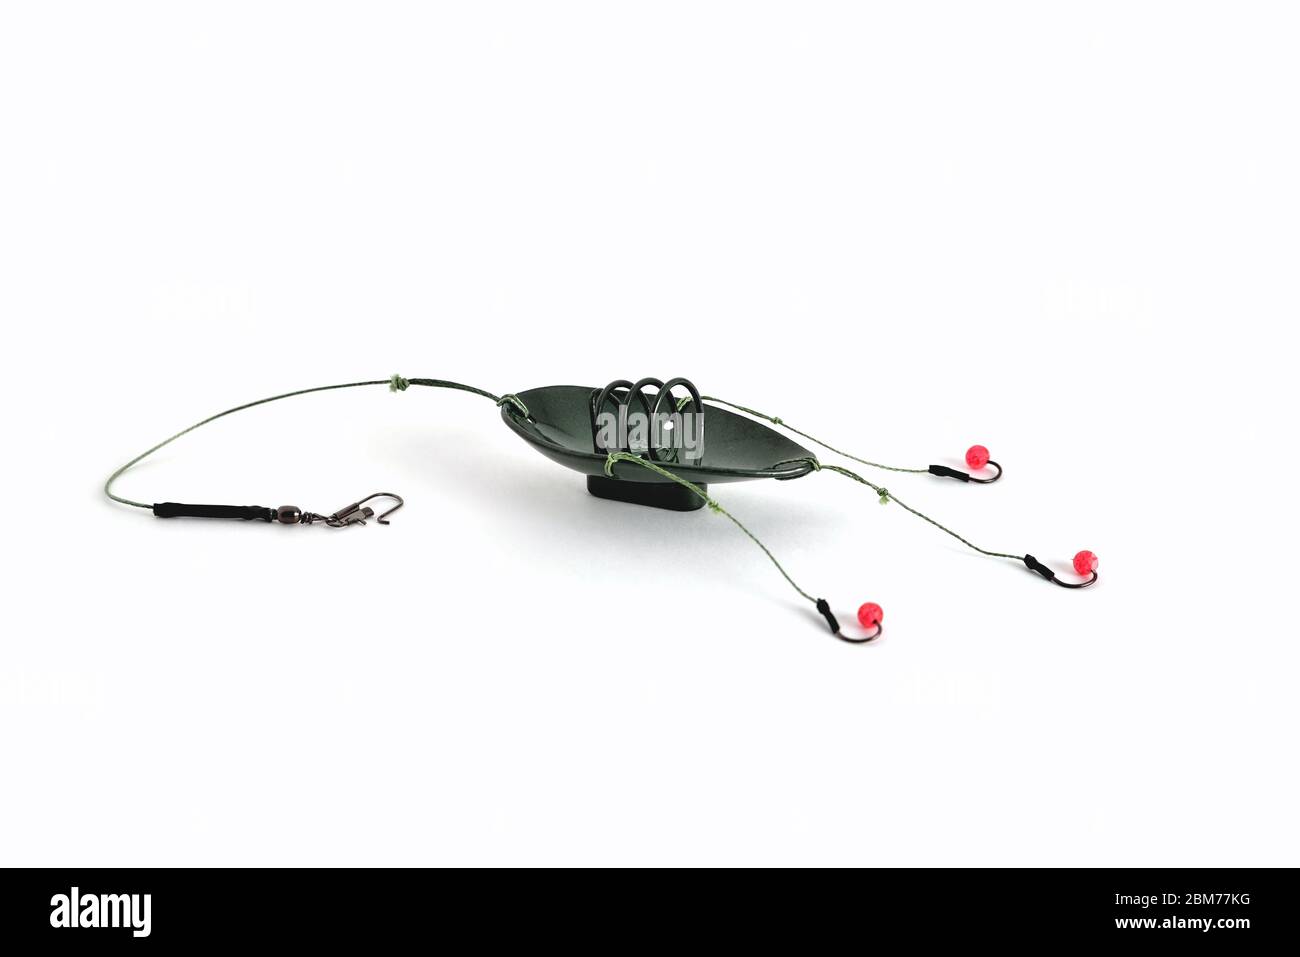 Fishing feeder and reel with accessories on white background Stock